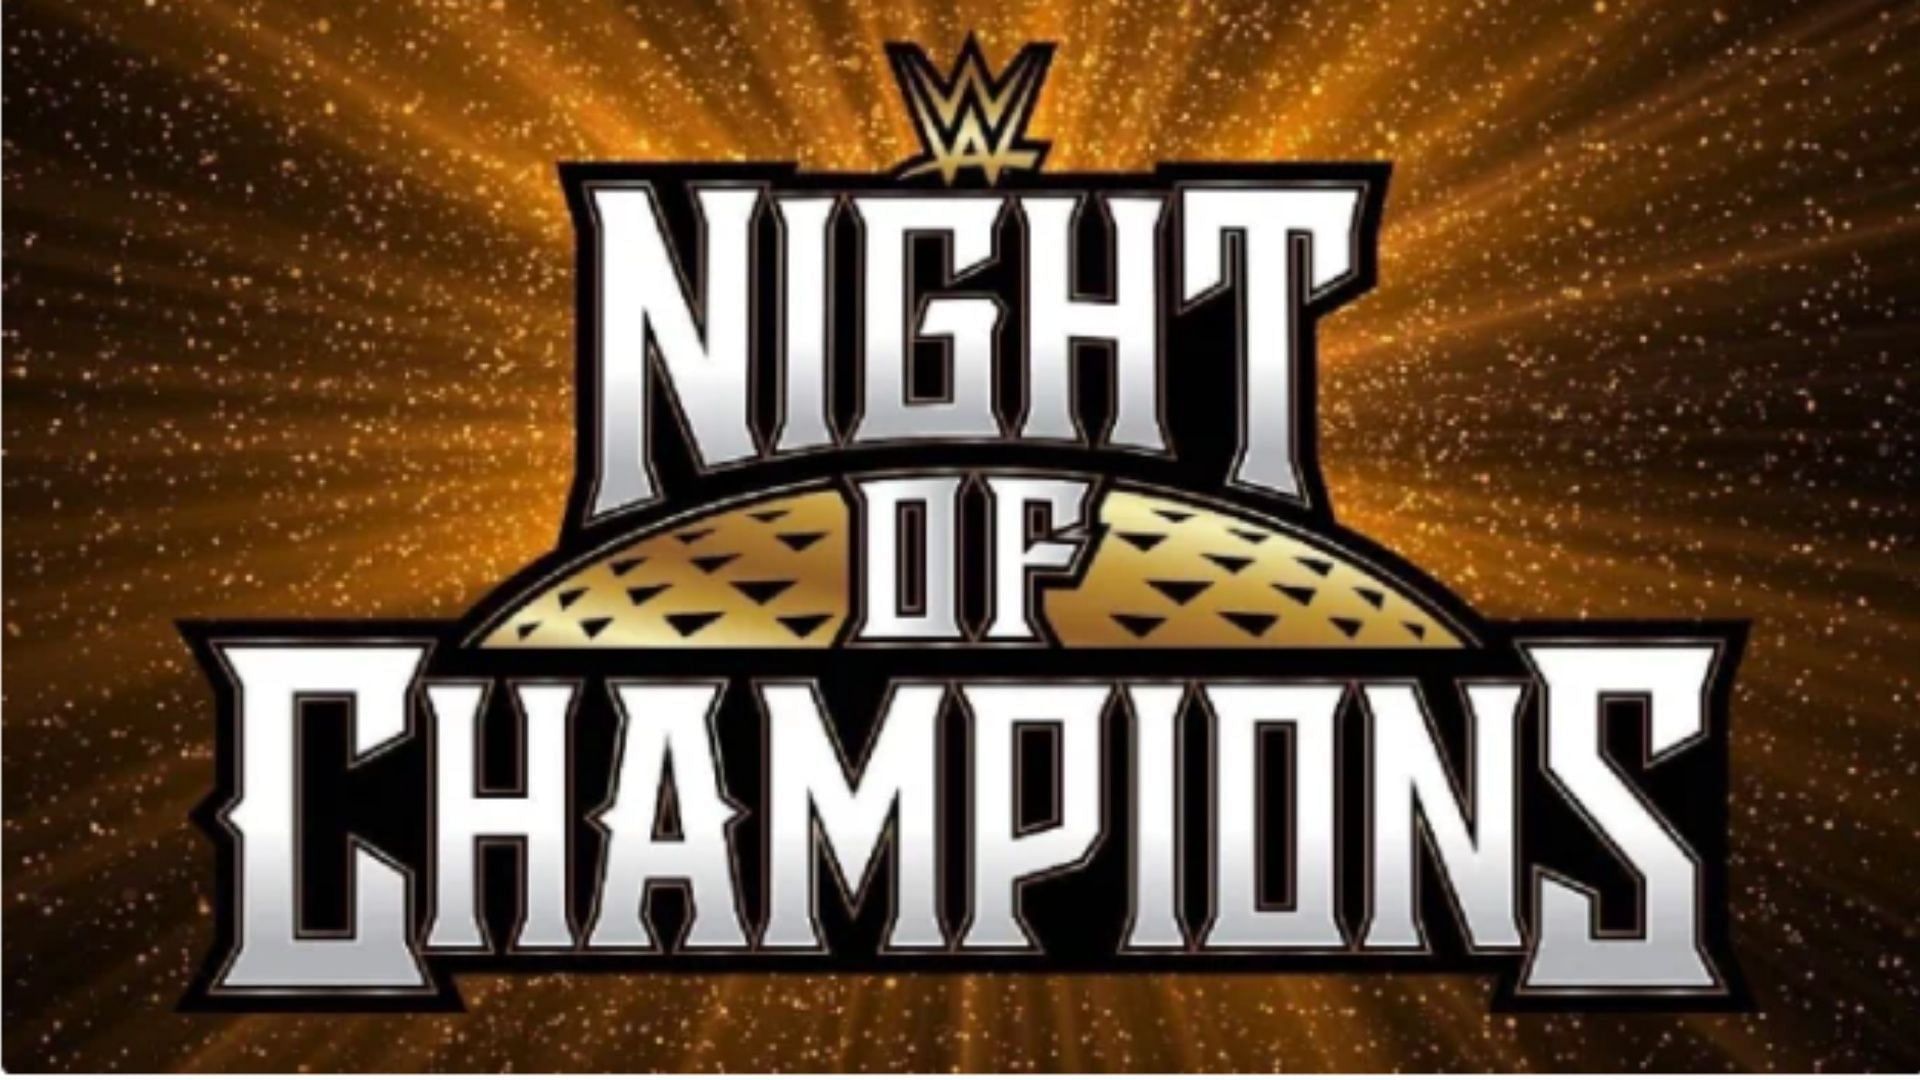 WWE Night of Champions takes place this Saturday.